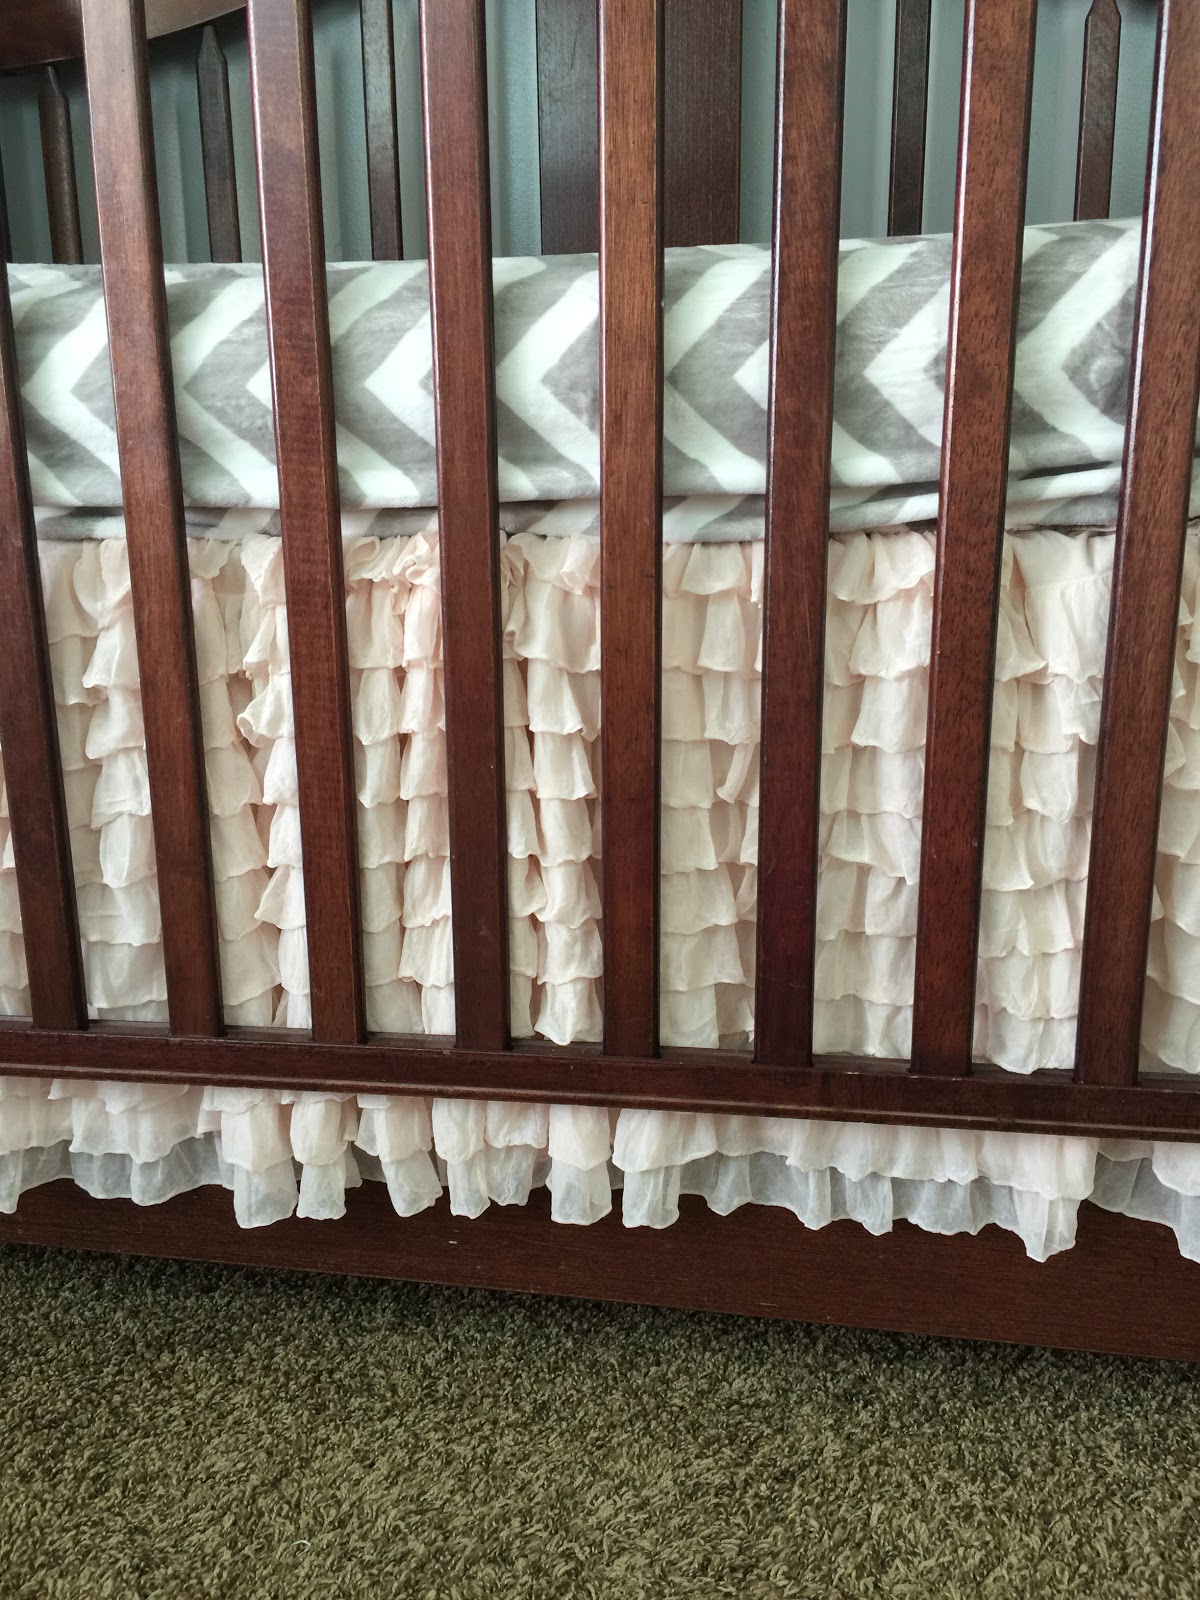 How to Sew a Ruffle Crib Skirt Using Ruffle Fabric (Includes Bed Sizes too-Twin, Queen, King)